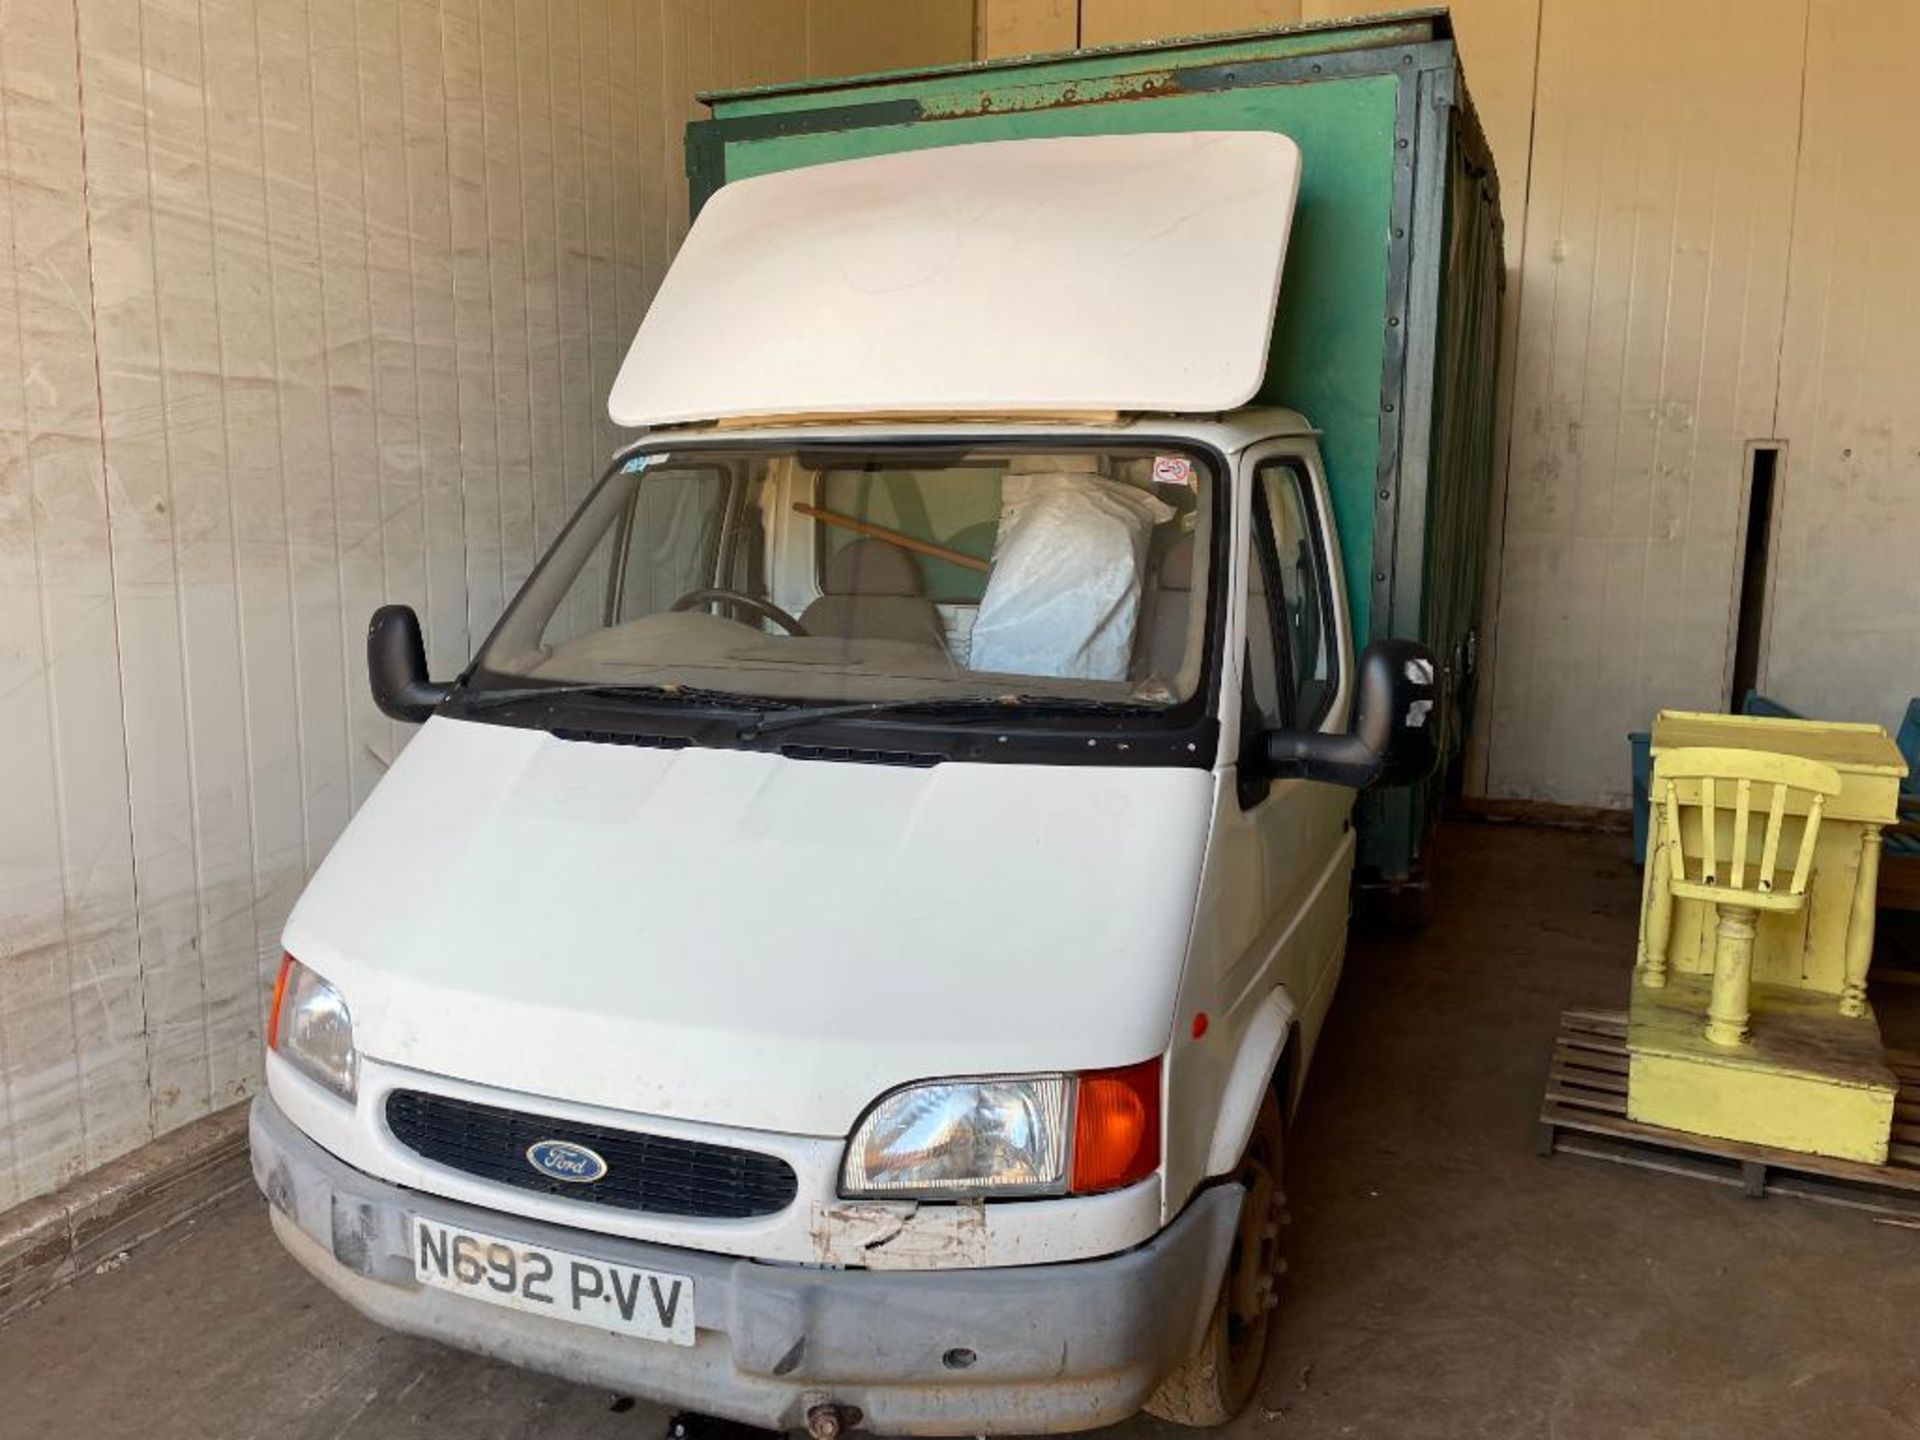 1995 Ford Transit curtain side manual van, twin wheel with 4m bed. Reg No: N692 PVV. Mileage: 292,24 - Image 2 of 6